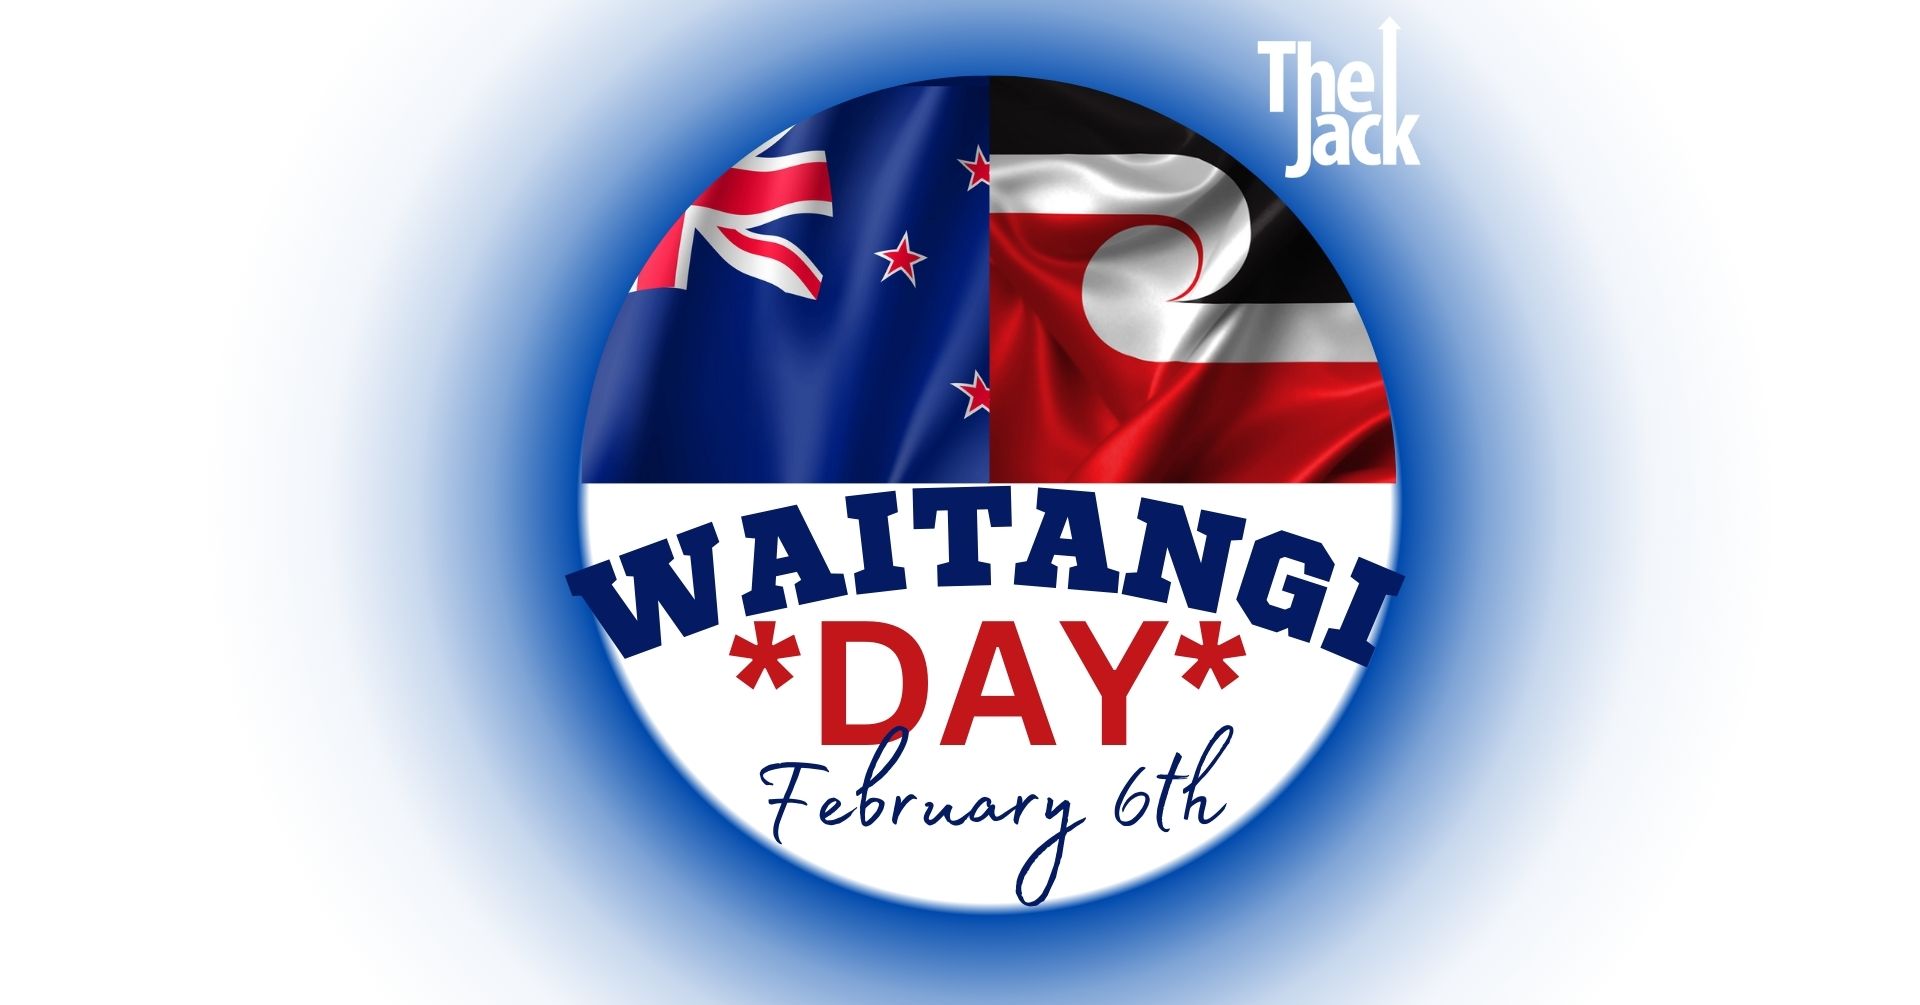 WAITANGI DAY FEBRUARY 6 THE JACK, CAIRNS The Jack Cairns